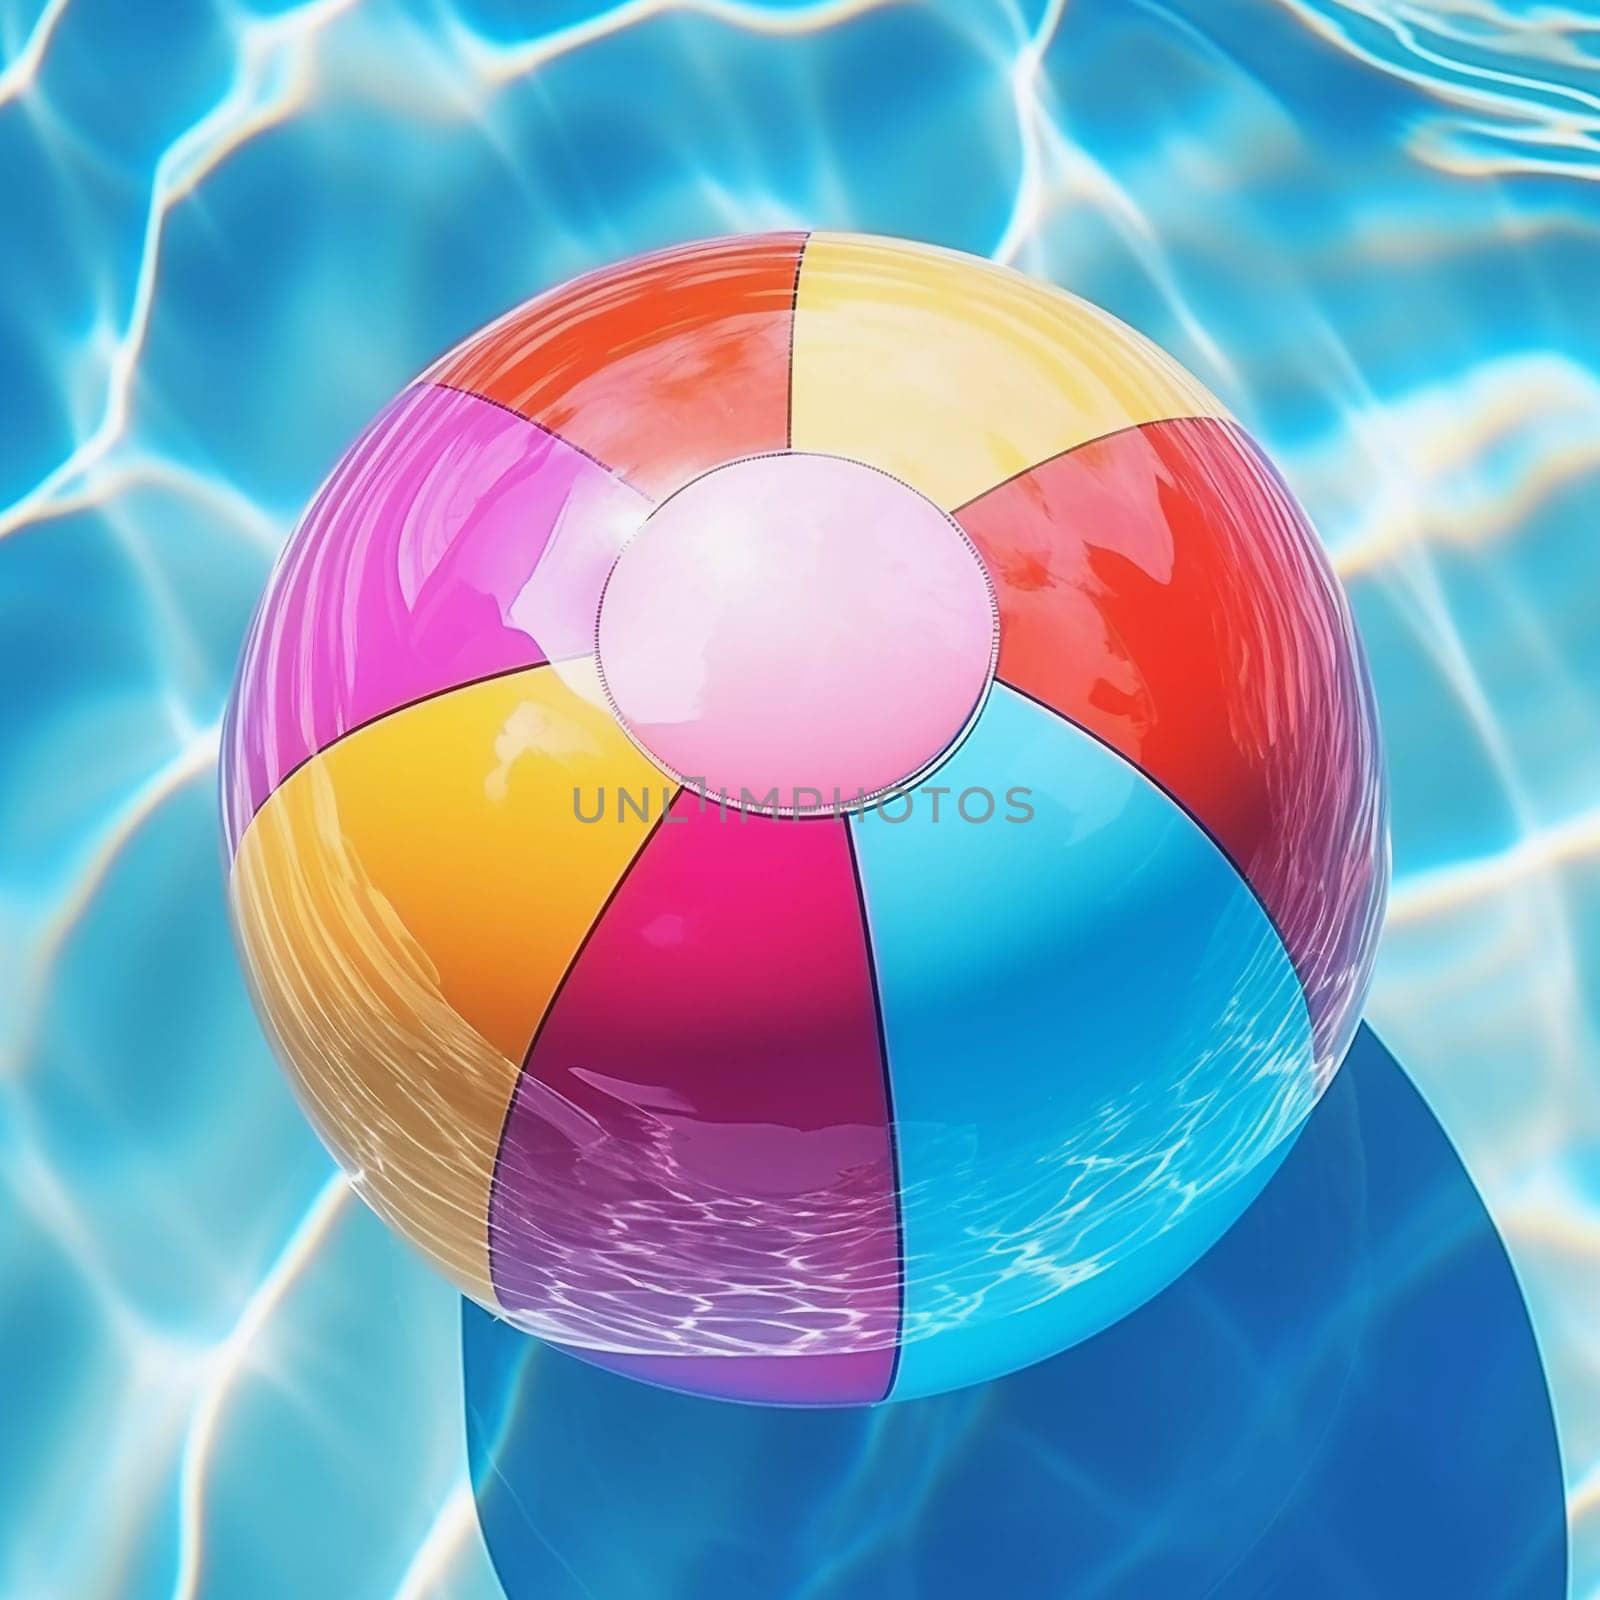 Inflatable Colorful Beach Ball. Floats on the surface of the water in the pool. Summer colorful vacation background.